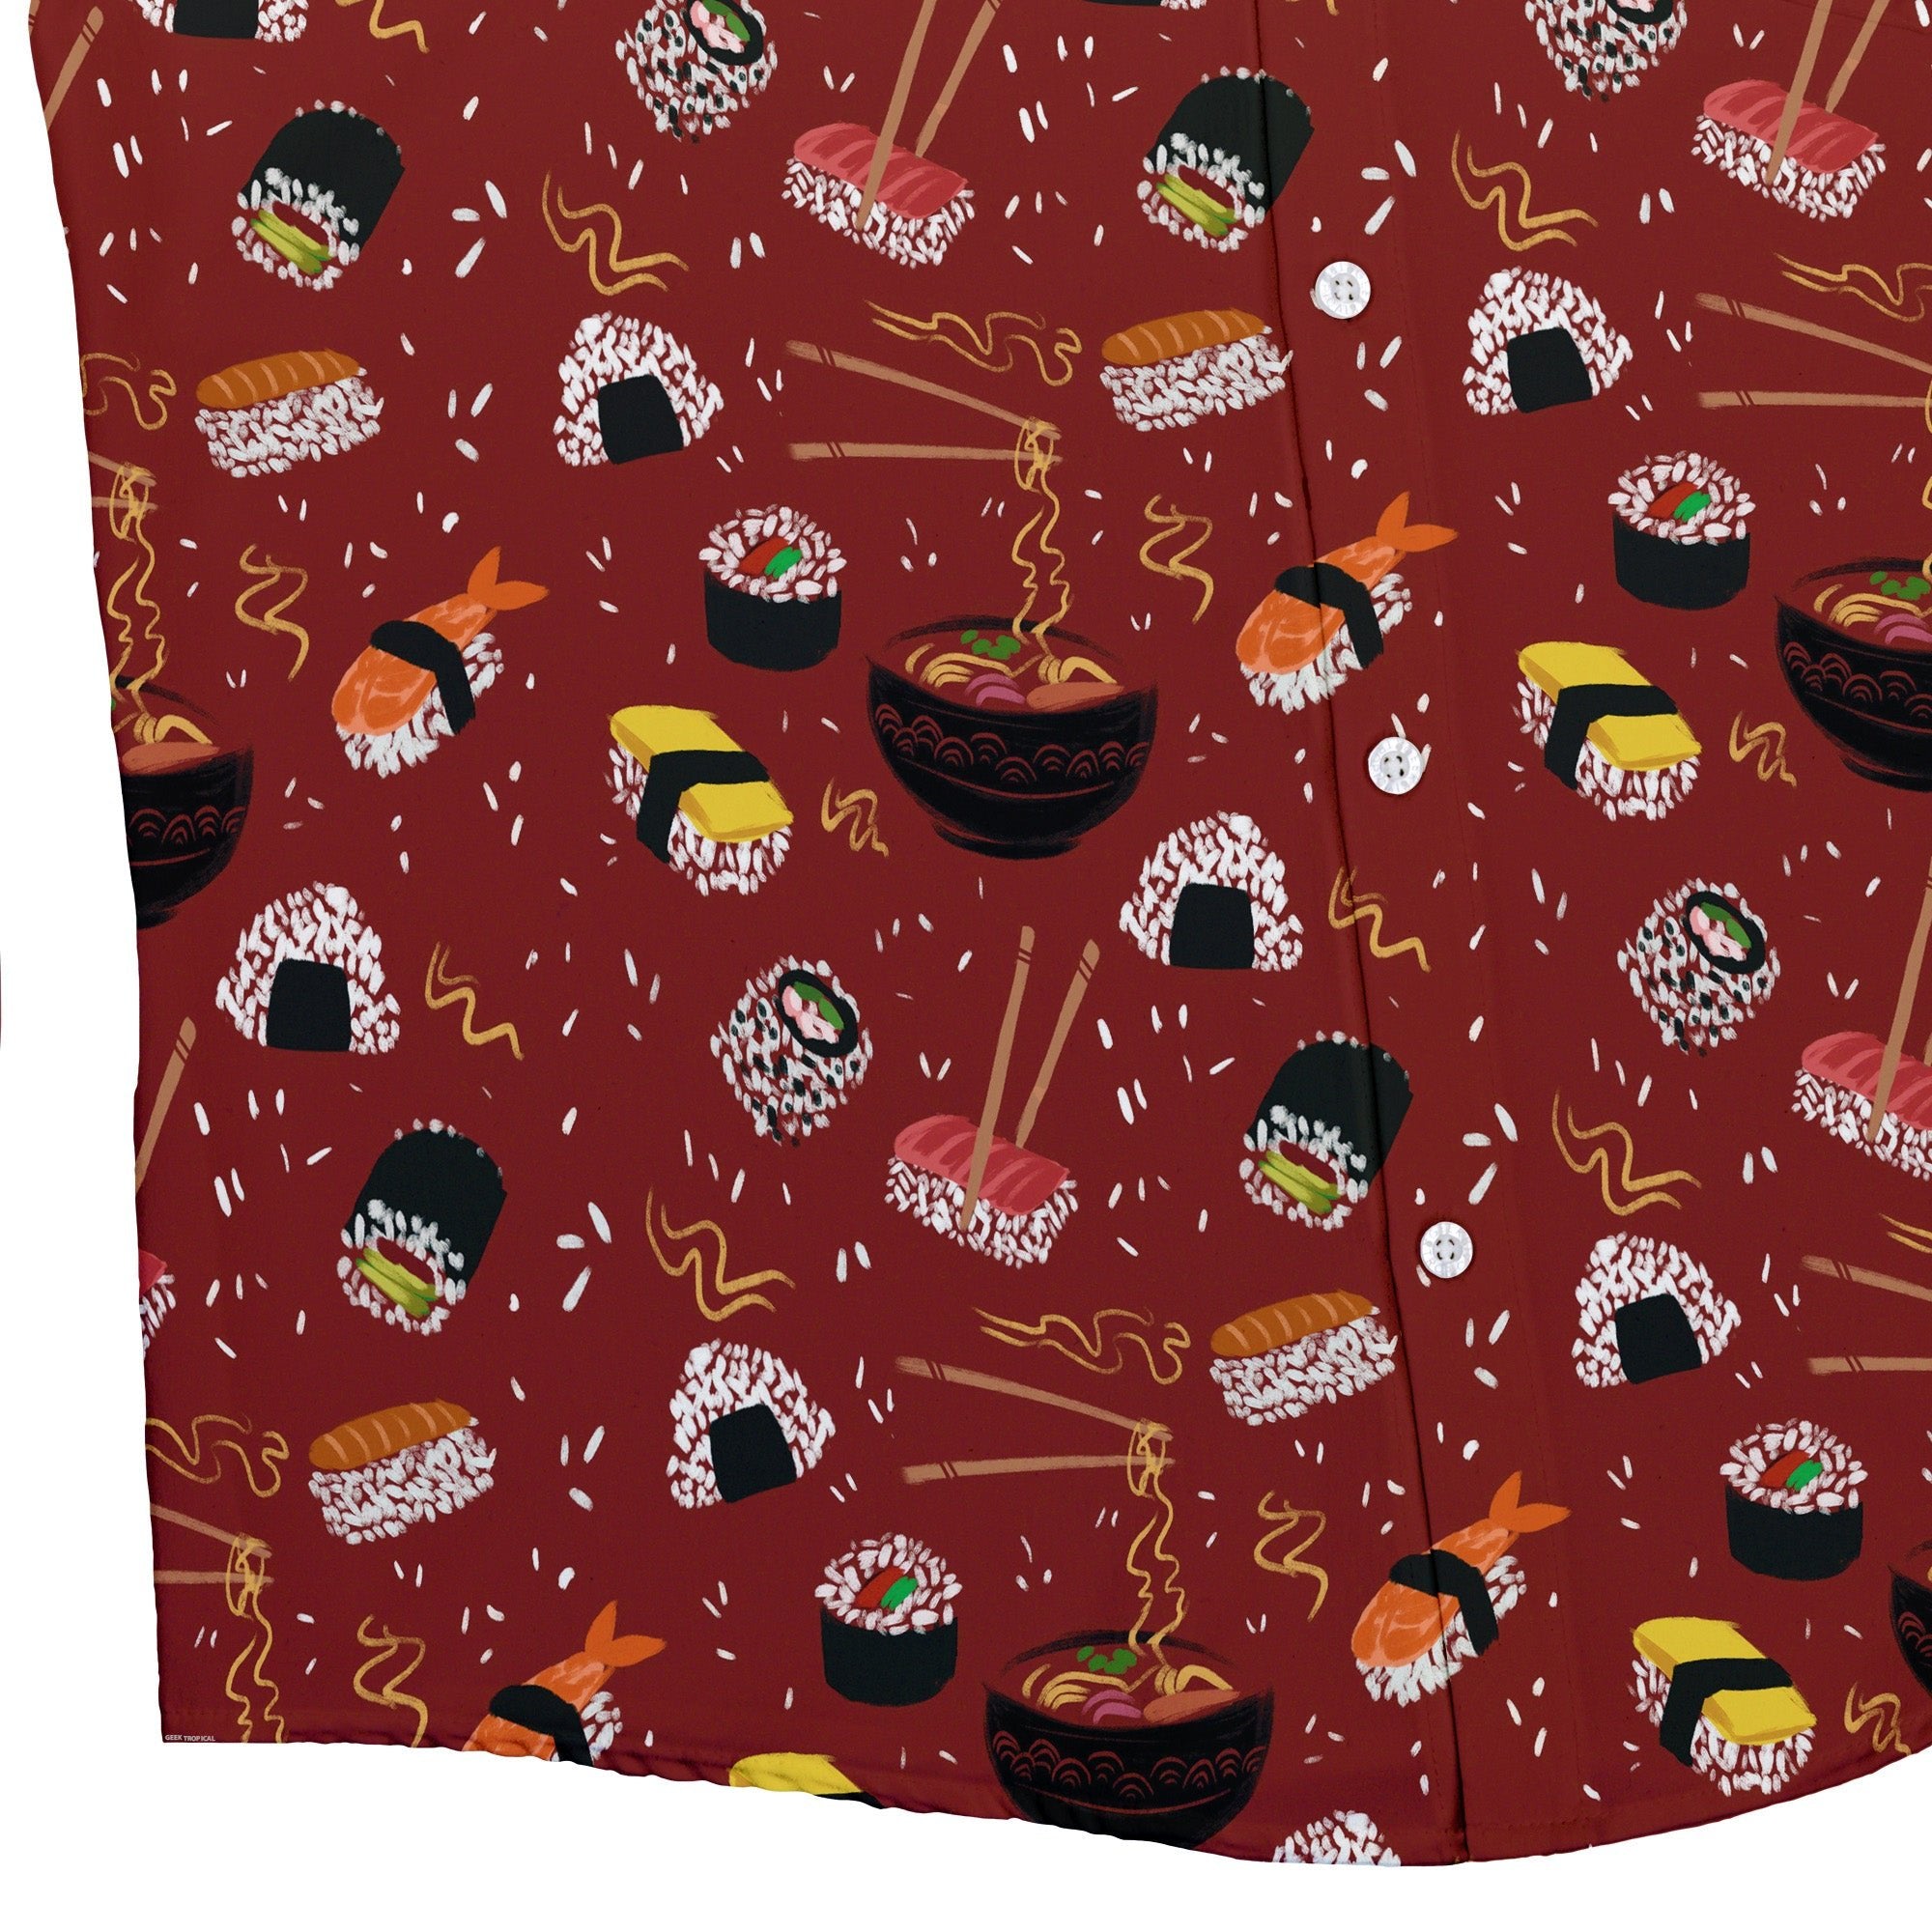 Ōishi Sushi Red Button Up Shirt - adult sizing - Anime - Design by Claire Murphy